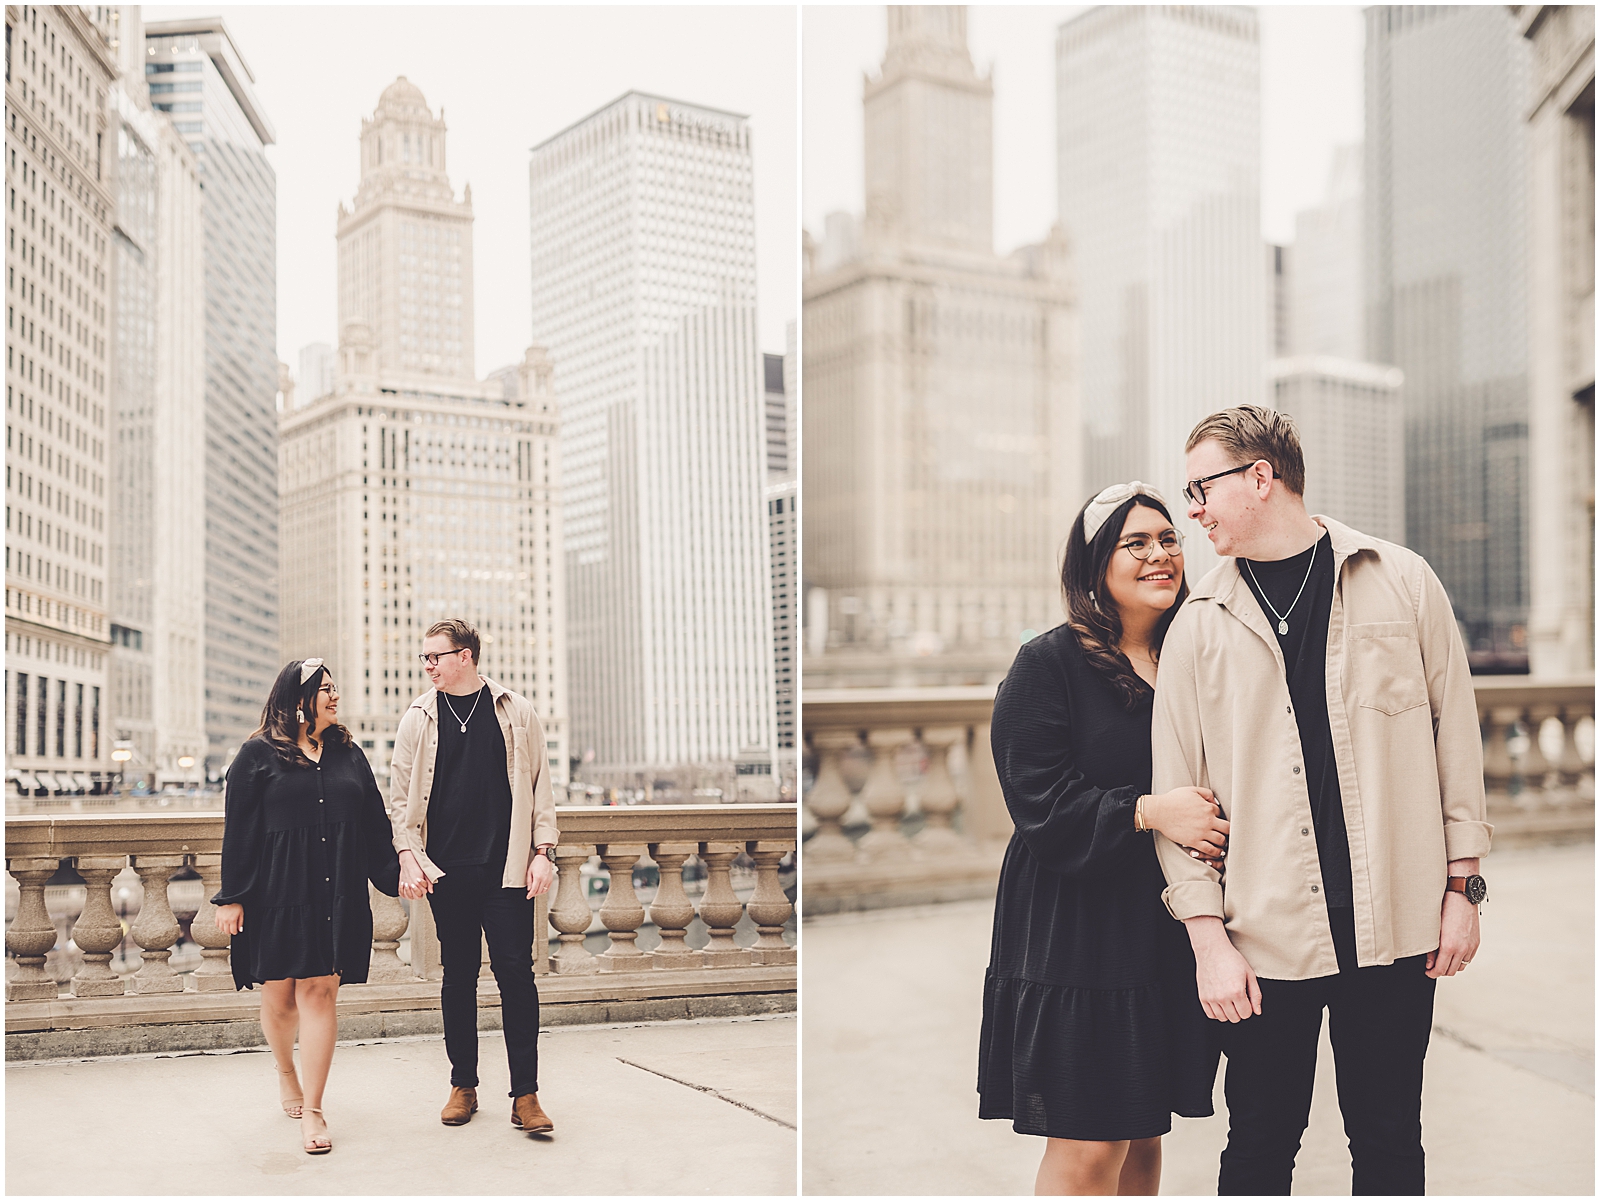 Neiry & Tyler's spring Milton Lee Olive Park engagement photos in Chicago, IL with Chicagoland wedding photographer Kara Evans Photographer.